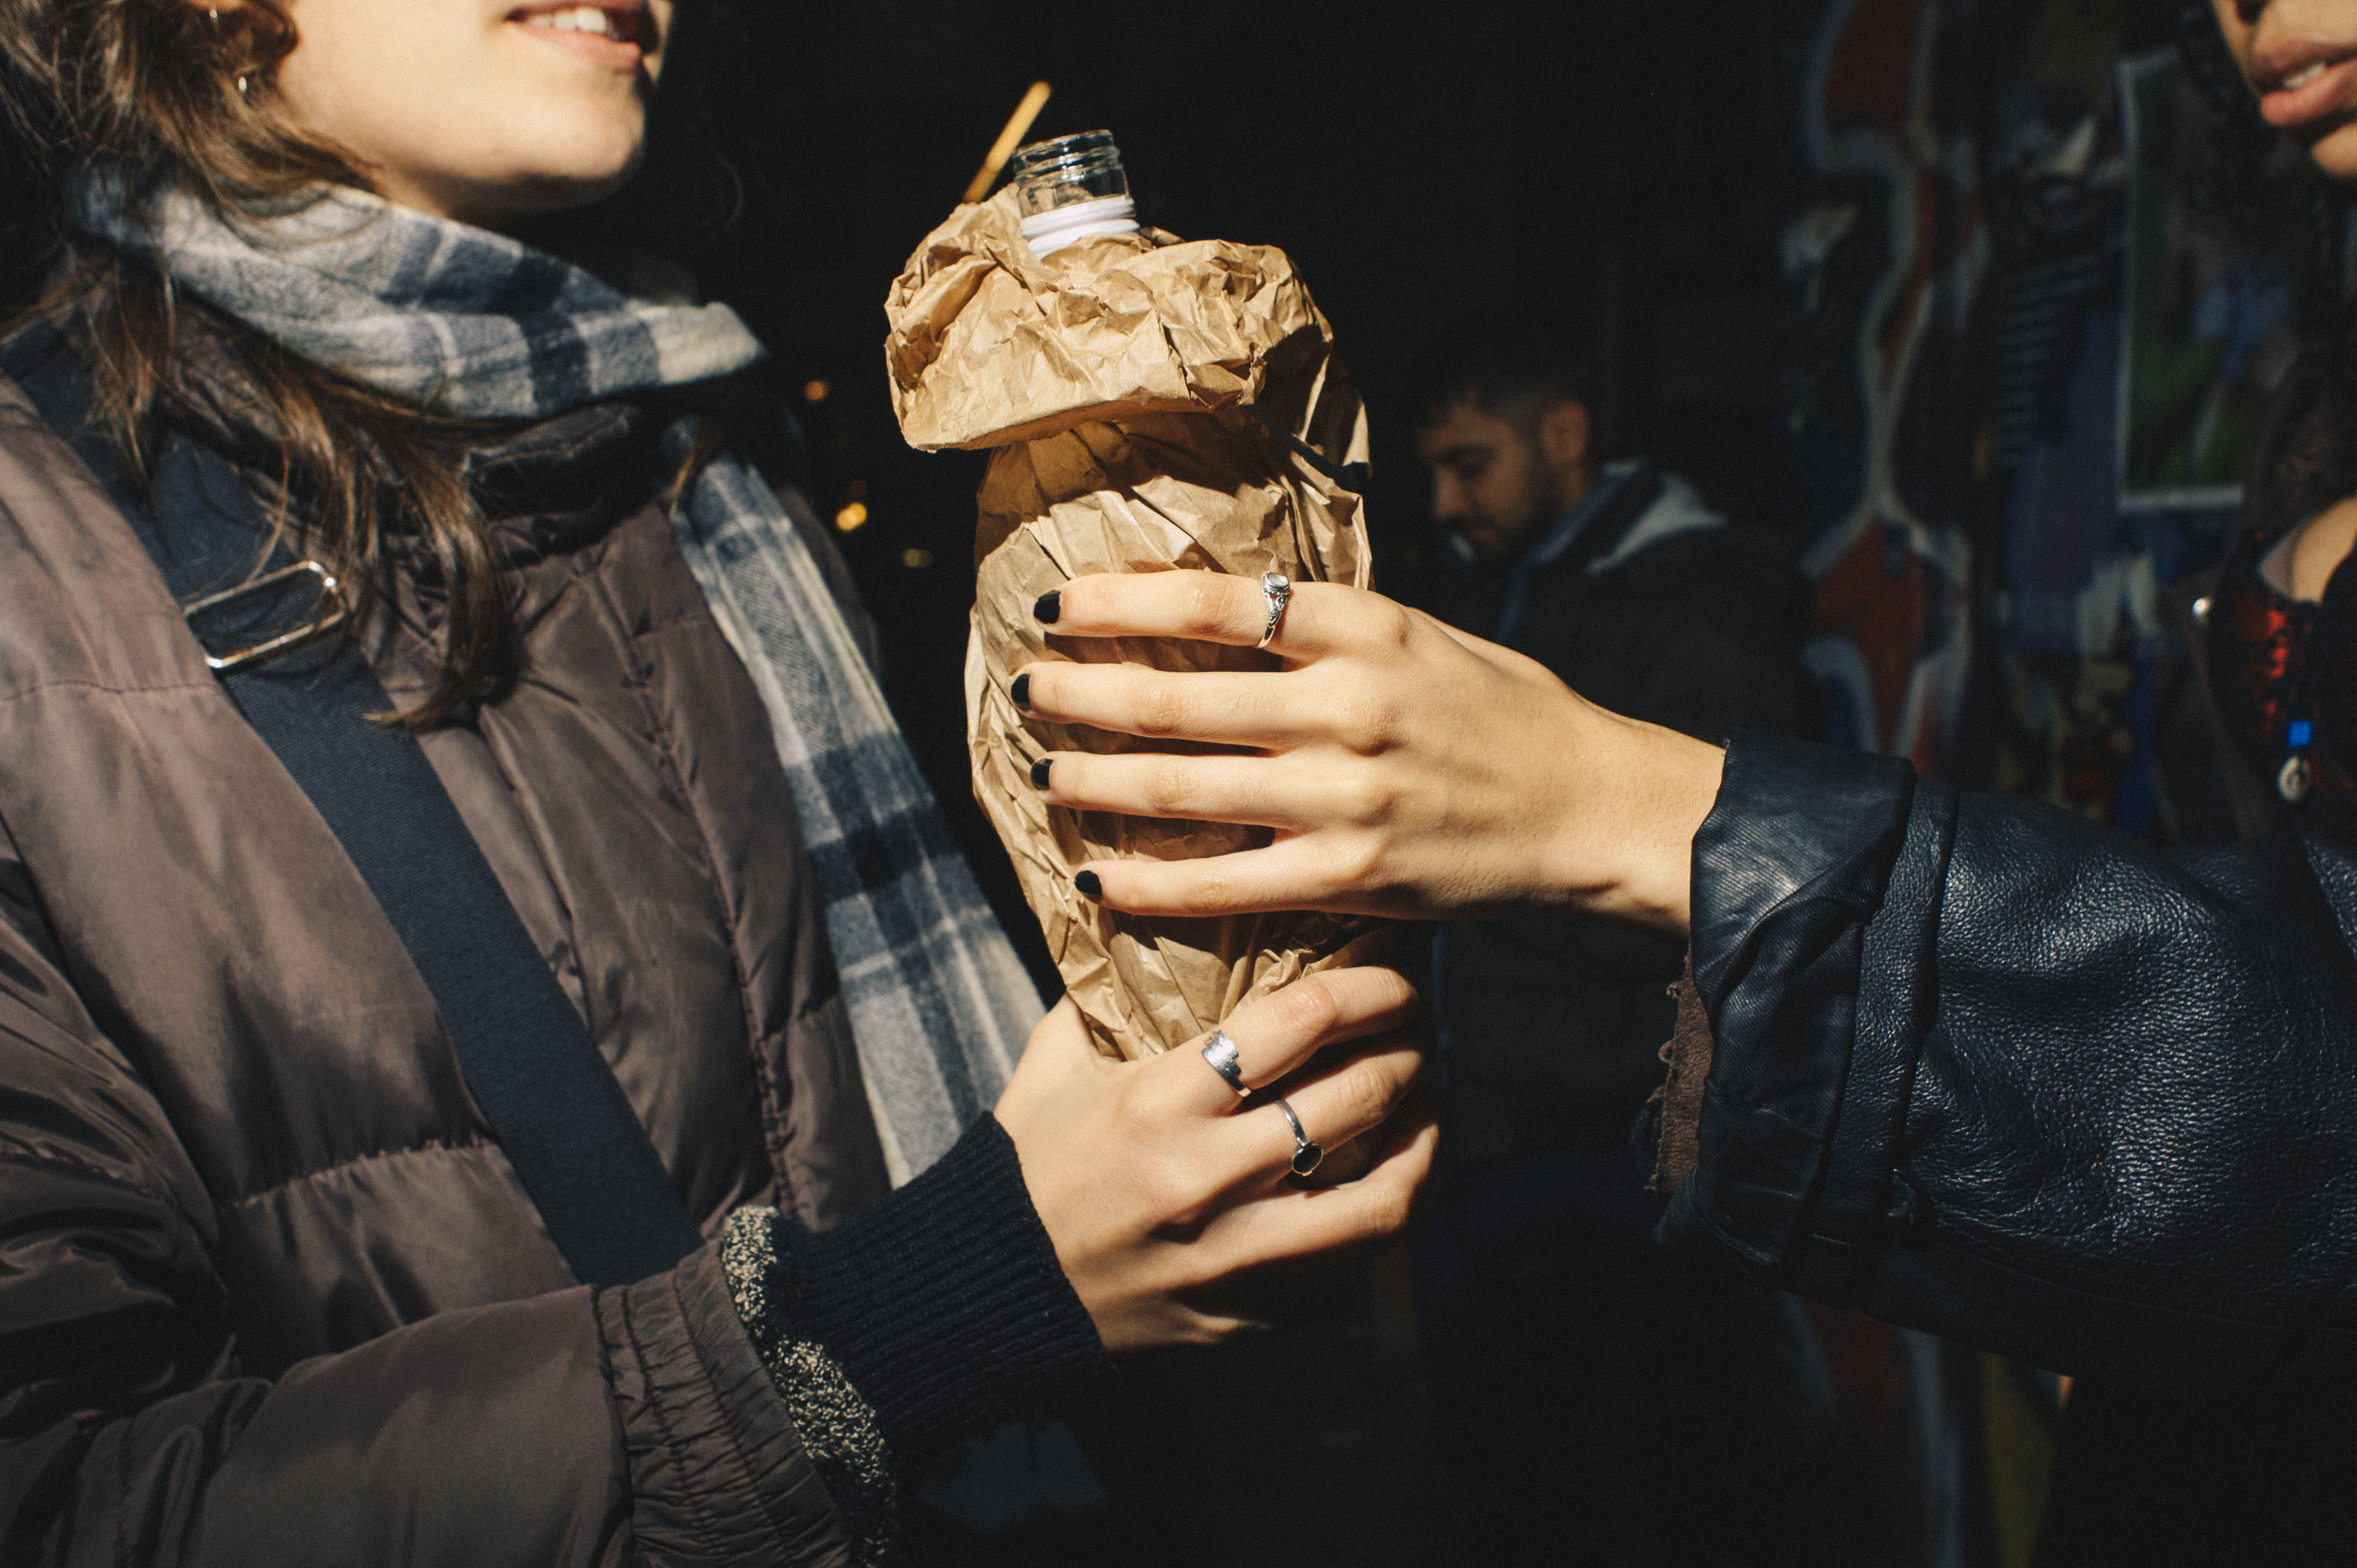 A woman passing a drink in a brown paper bag to another woman.